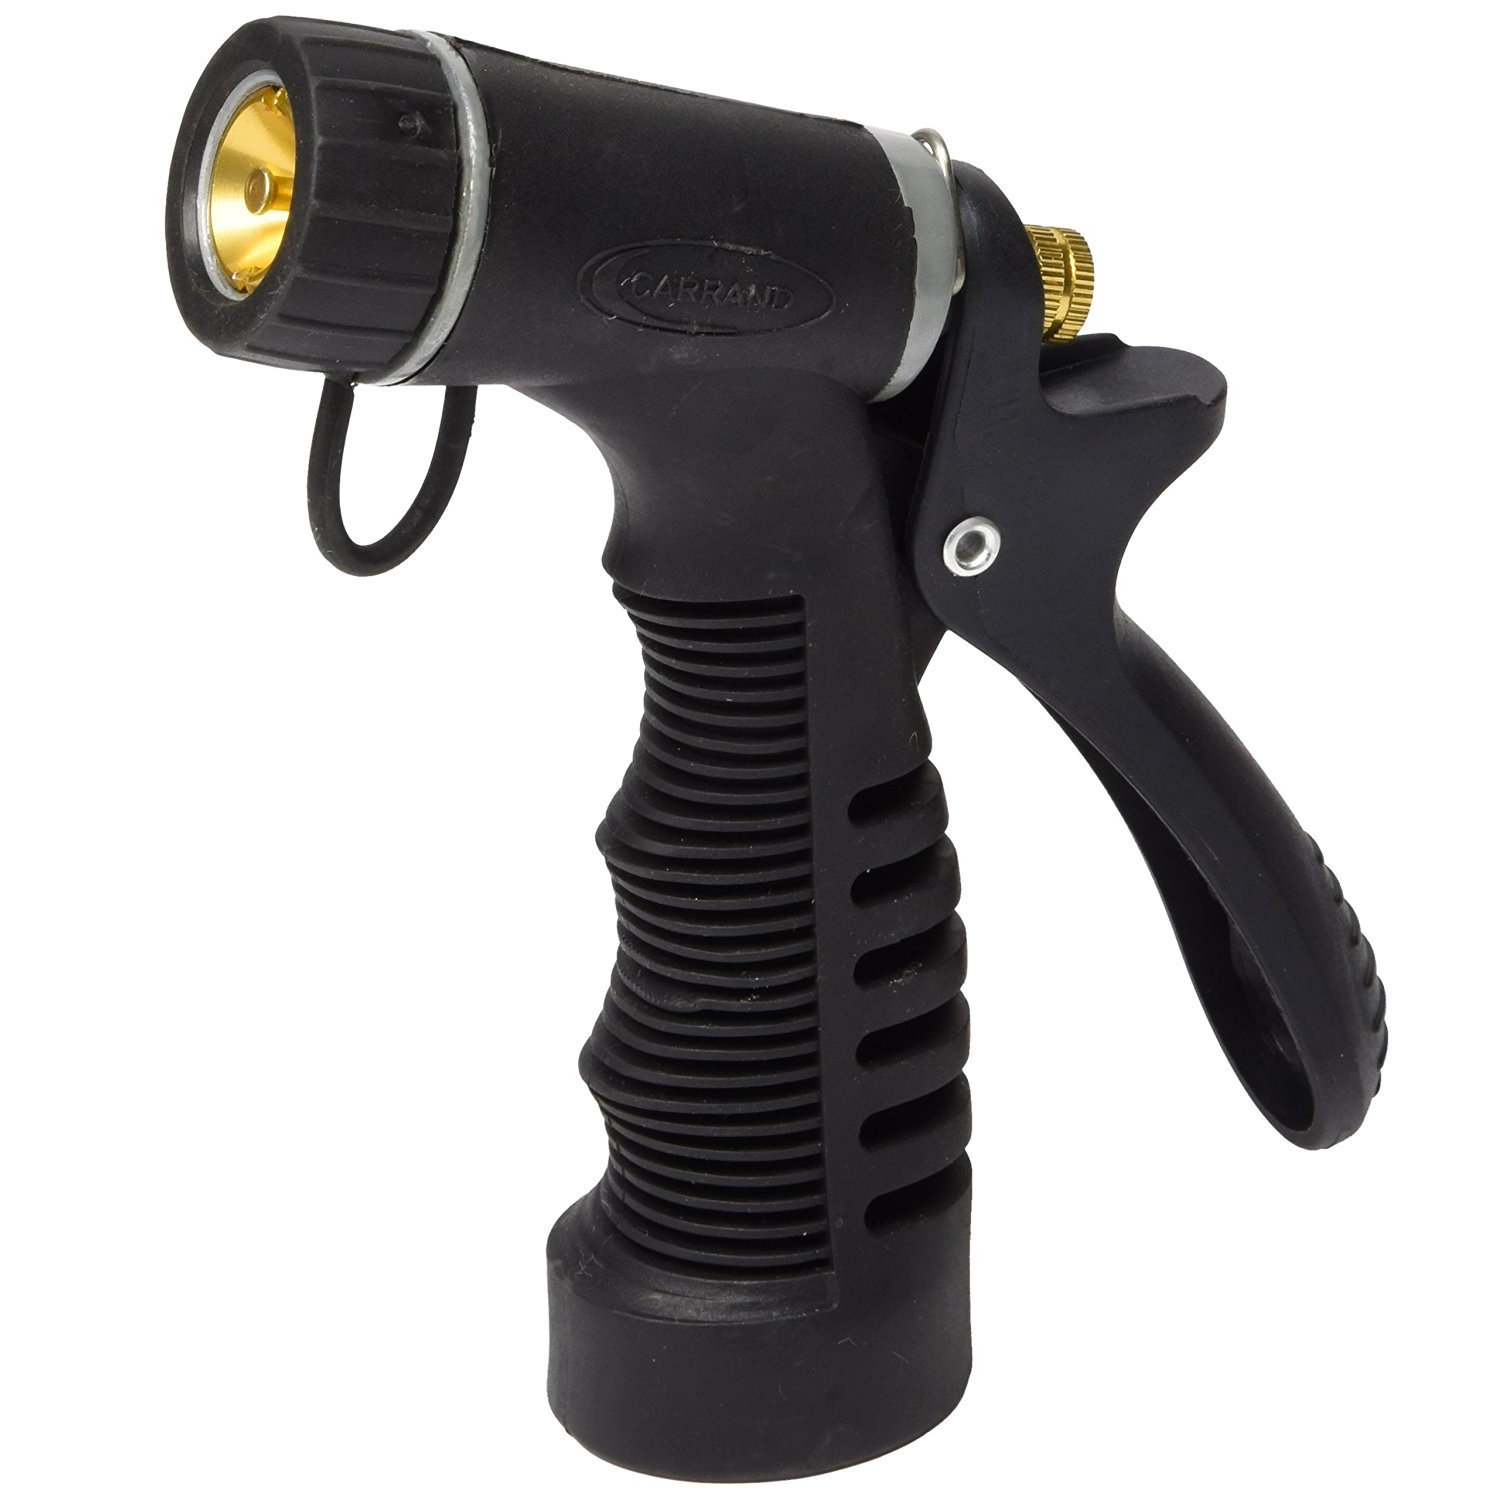 Insulated Industrial Grade Power Spray Nozzle ONLY $2.71! (Add-On Item)